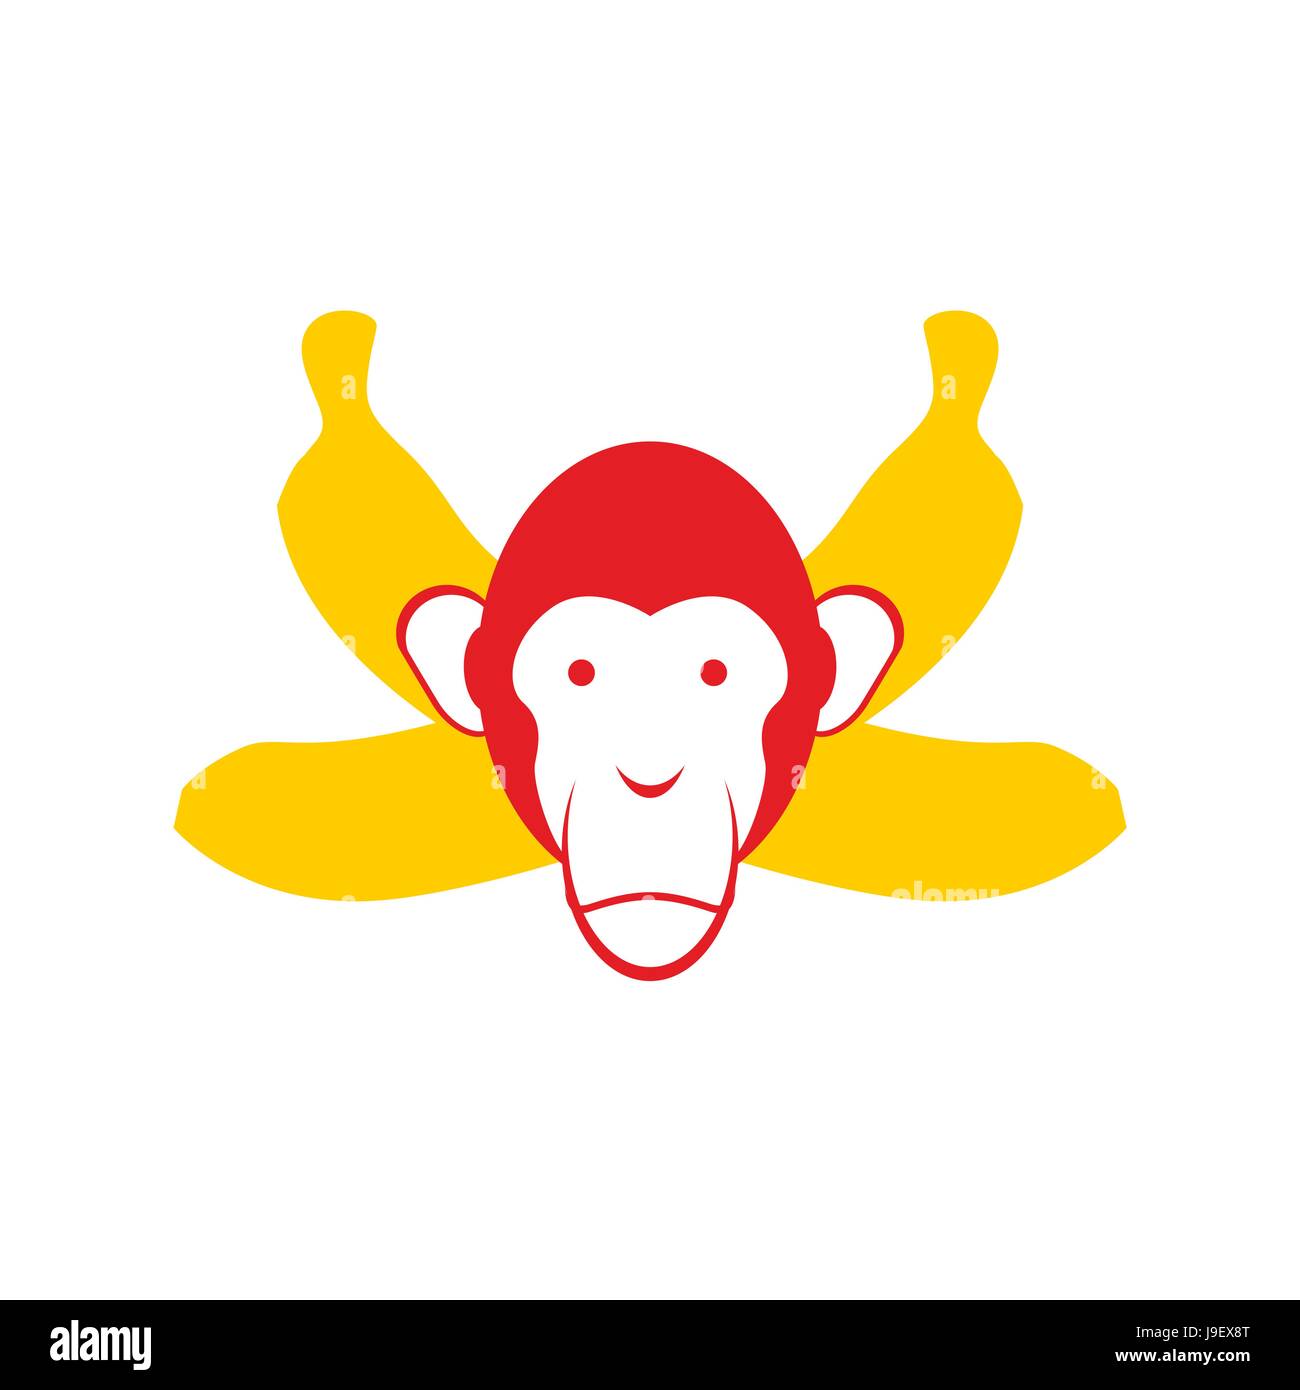 Monkey and bananas. Chimpanzee head and crossed bananas. Red Monkey symbol for Chinese new year 2016. Stock Vector